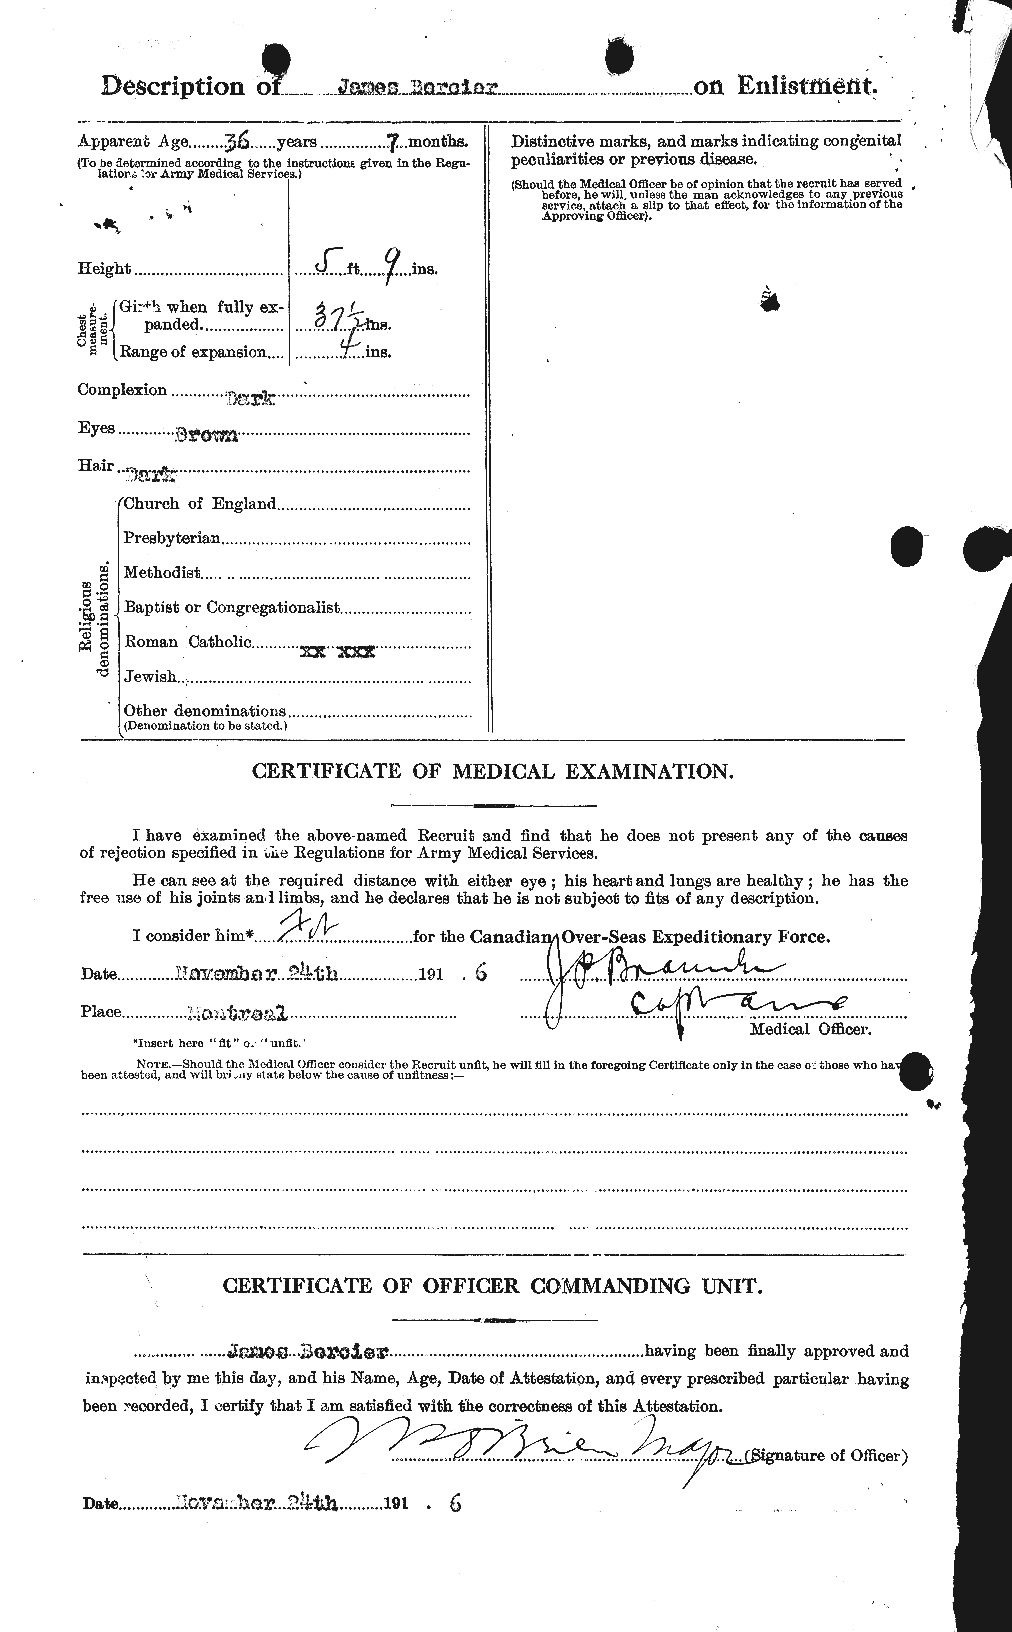 Personnel Records of the First World War - CEF 237701b